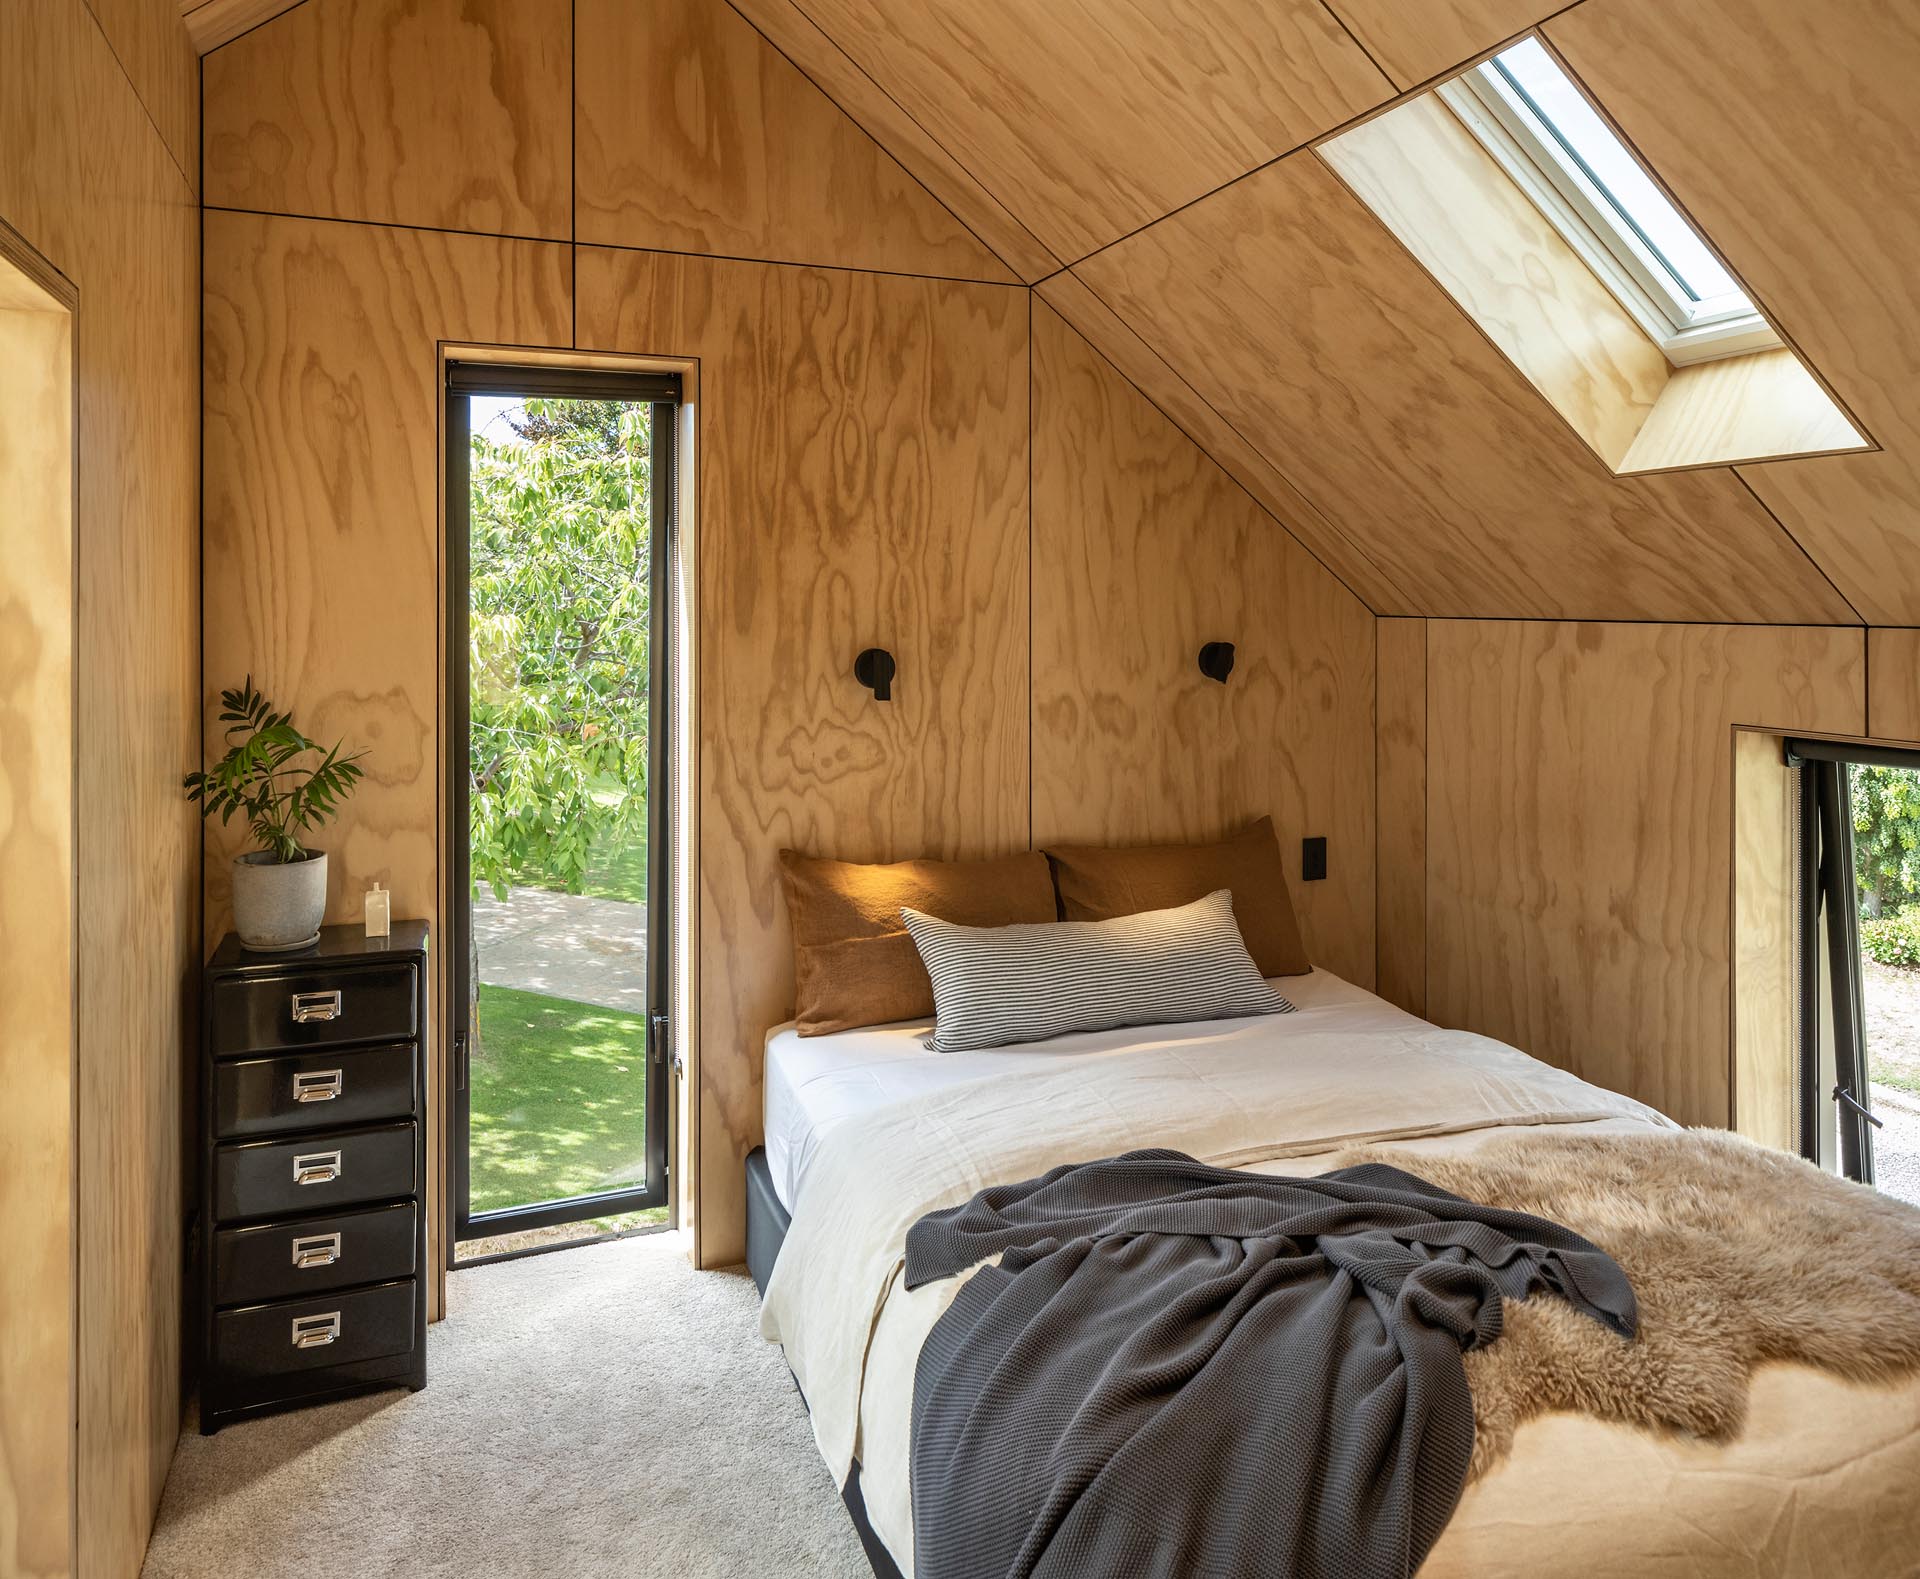 In this modern bedroom, a tall window provides views of the trees, while the wood walls and ceiling adds a warm and cozy touch.